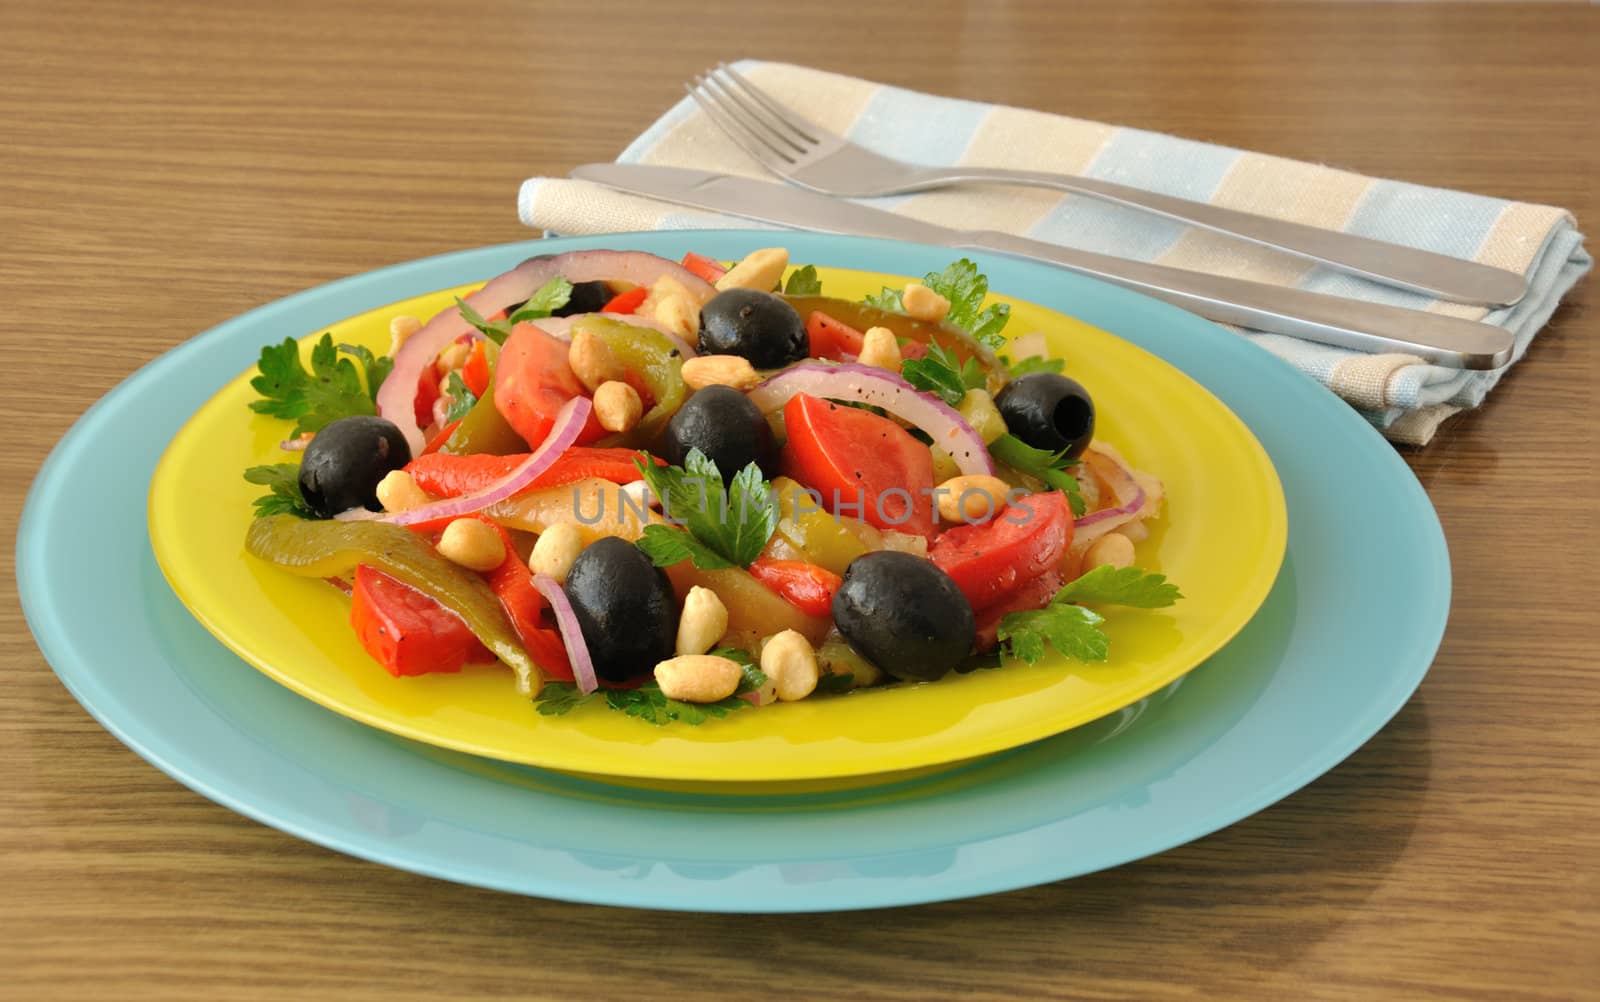 Salad of roasted peppers with tomato, peanuts and olives by Apolonia